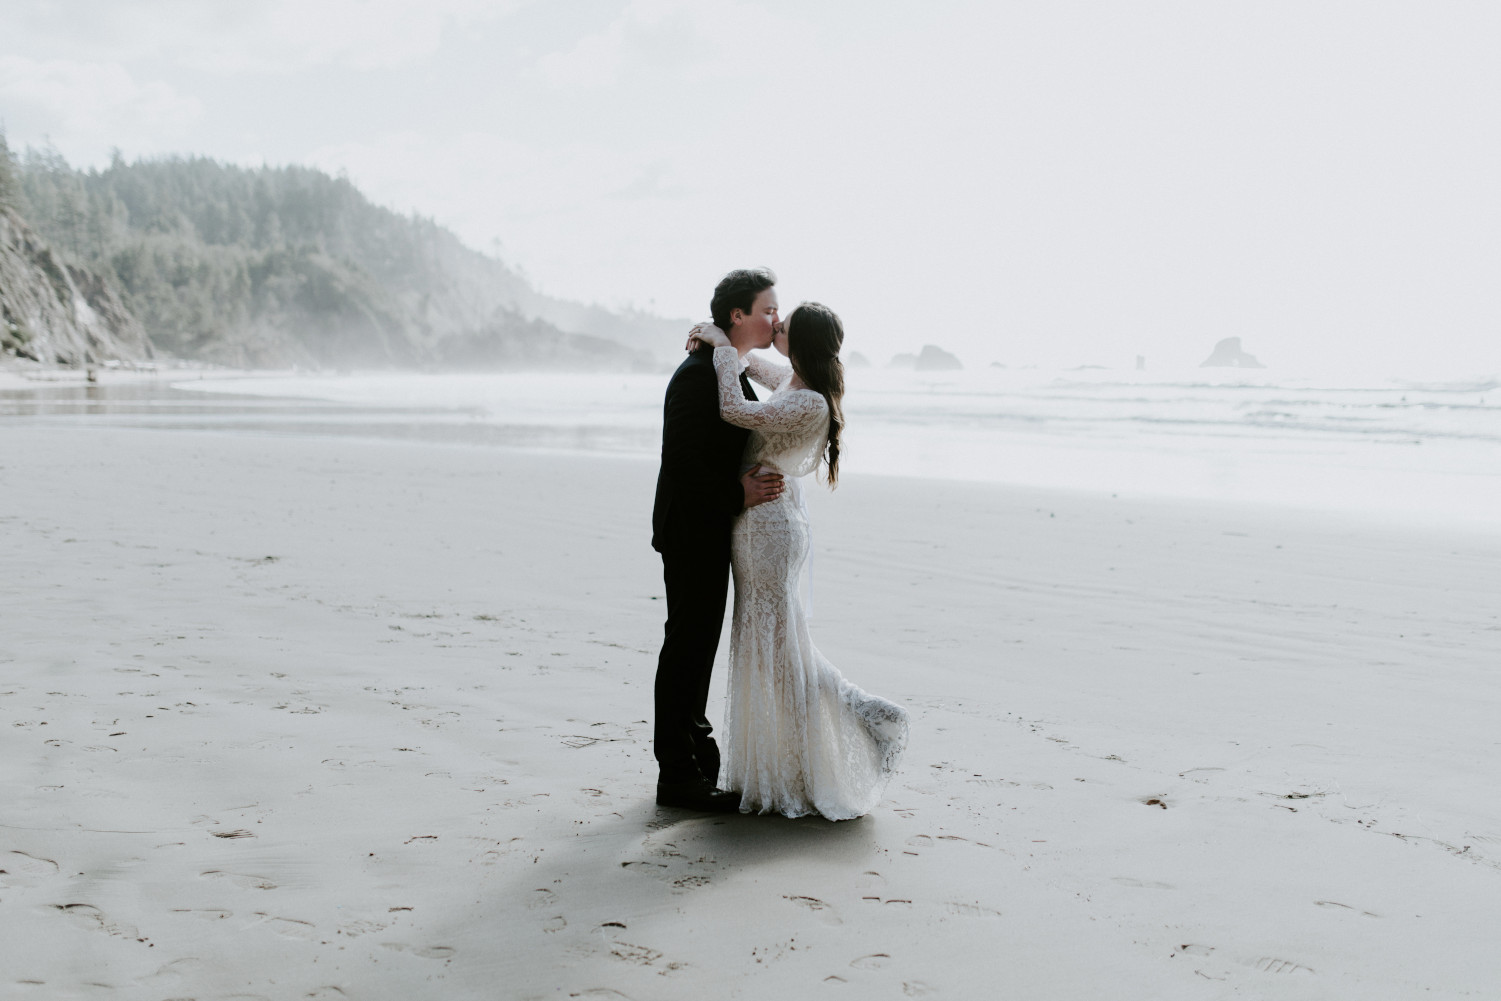 Nicole and Vlad hold each other at Indian Beach. Elopement wedding photography at Cannon Beach by Sienna Plus Josh.